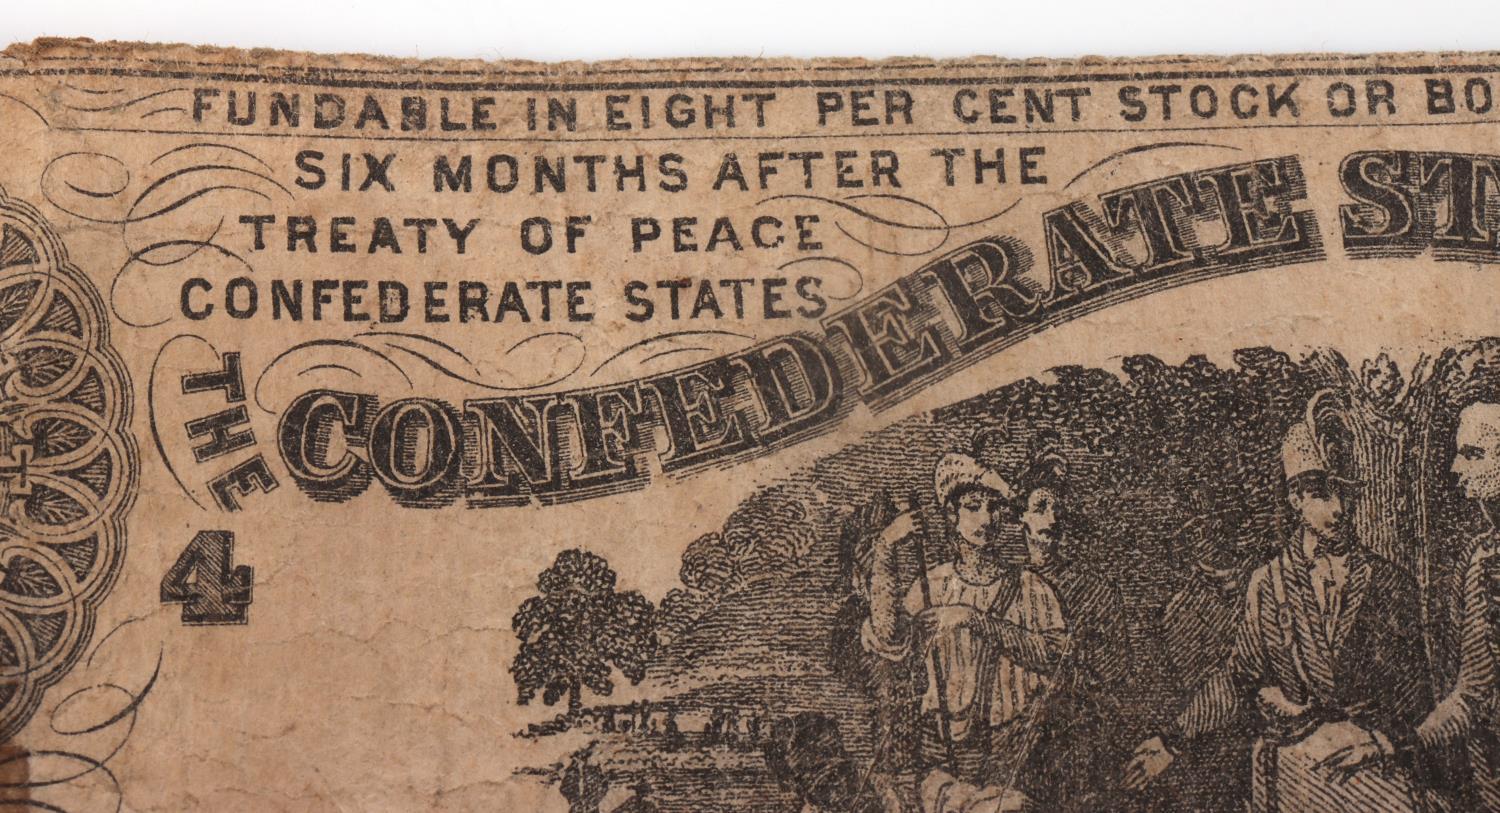 CONFEDERATE STATES OF AMERICA PAPER CURRENCY